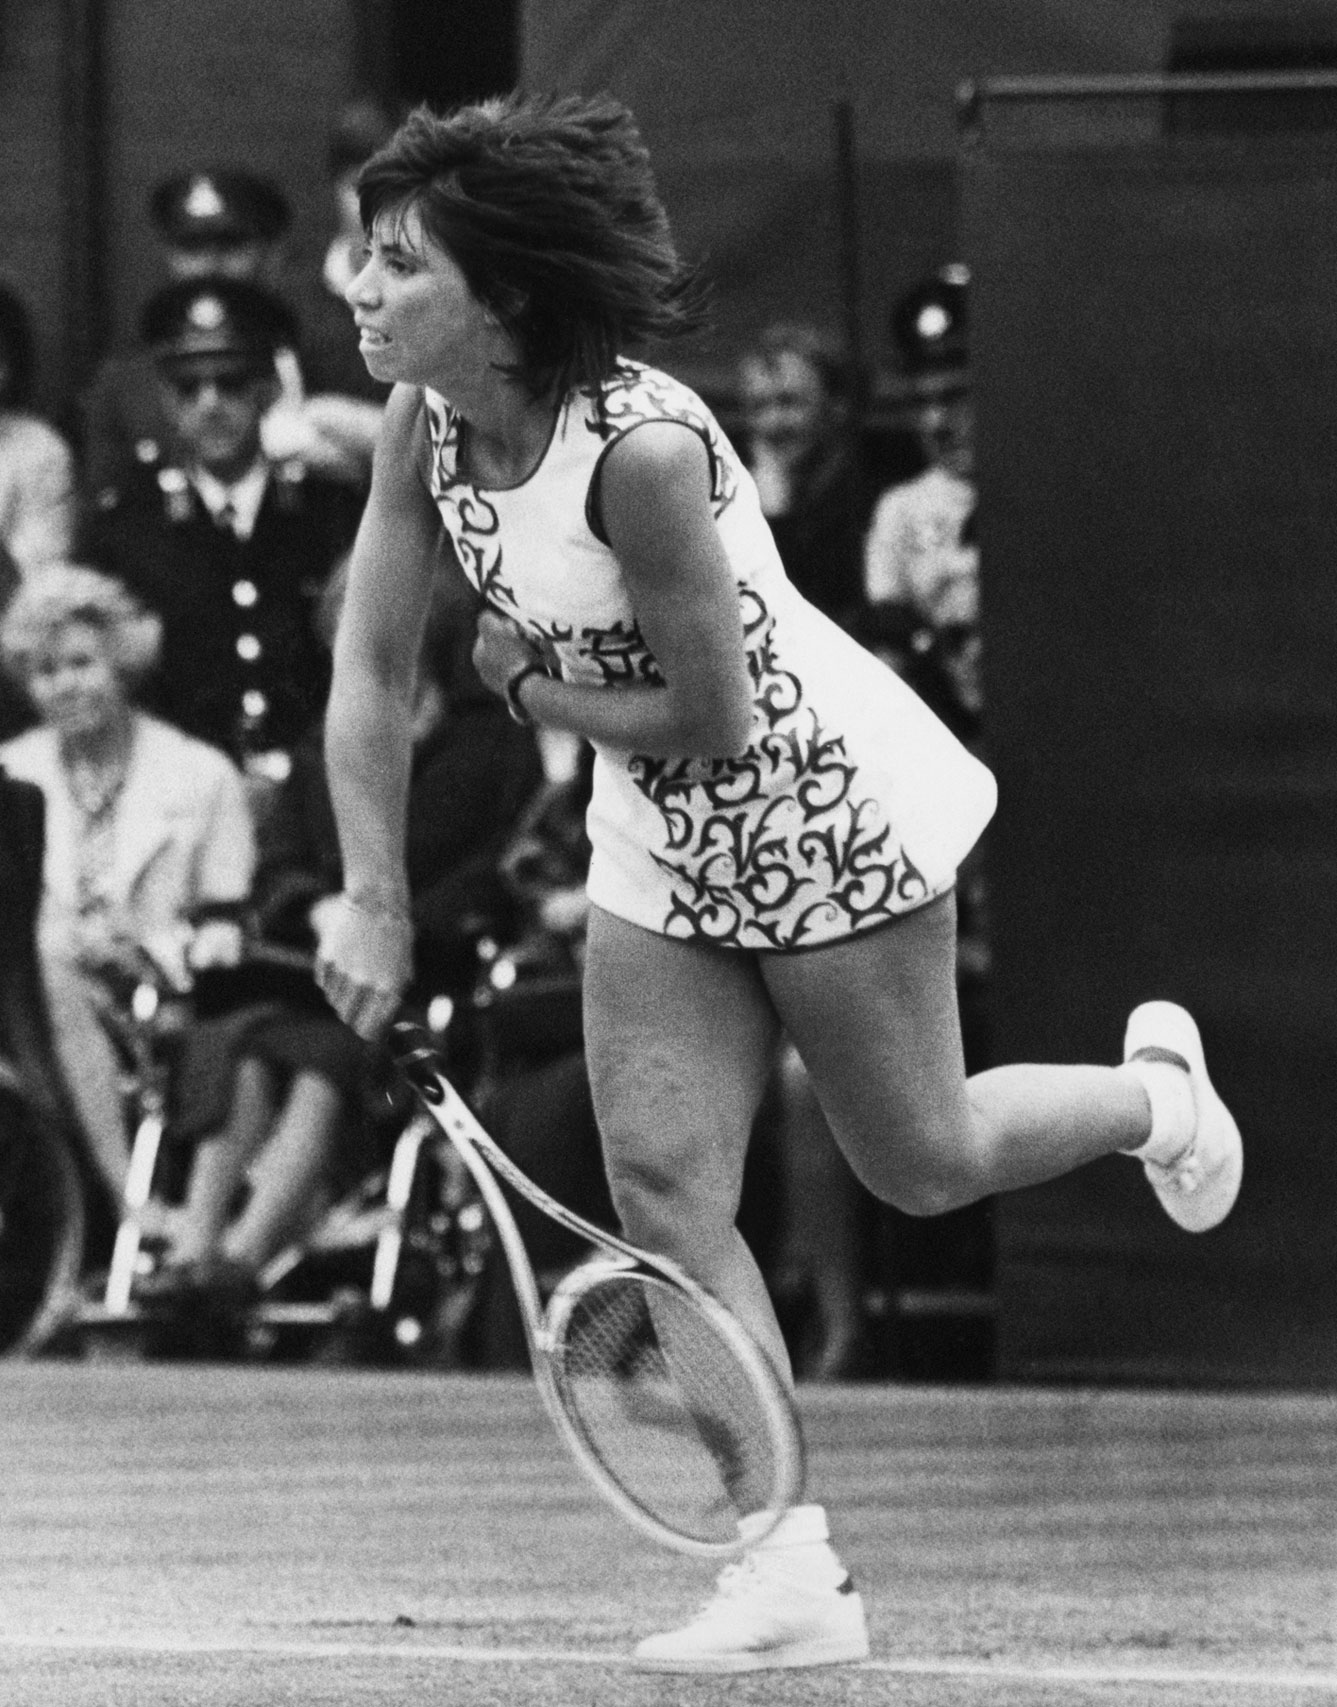 Rosemary Casals' 1972 dress was deemed to constitute advertising and was subsequently banned by the competition administrators.